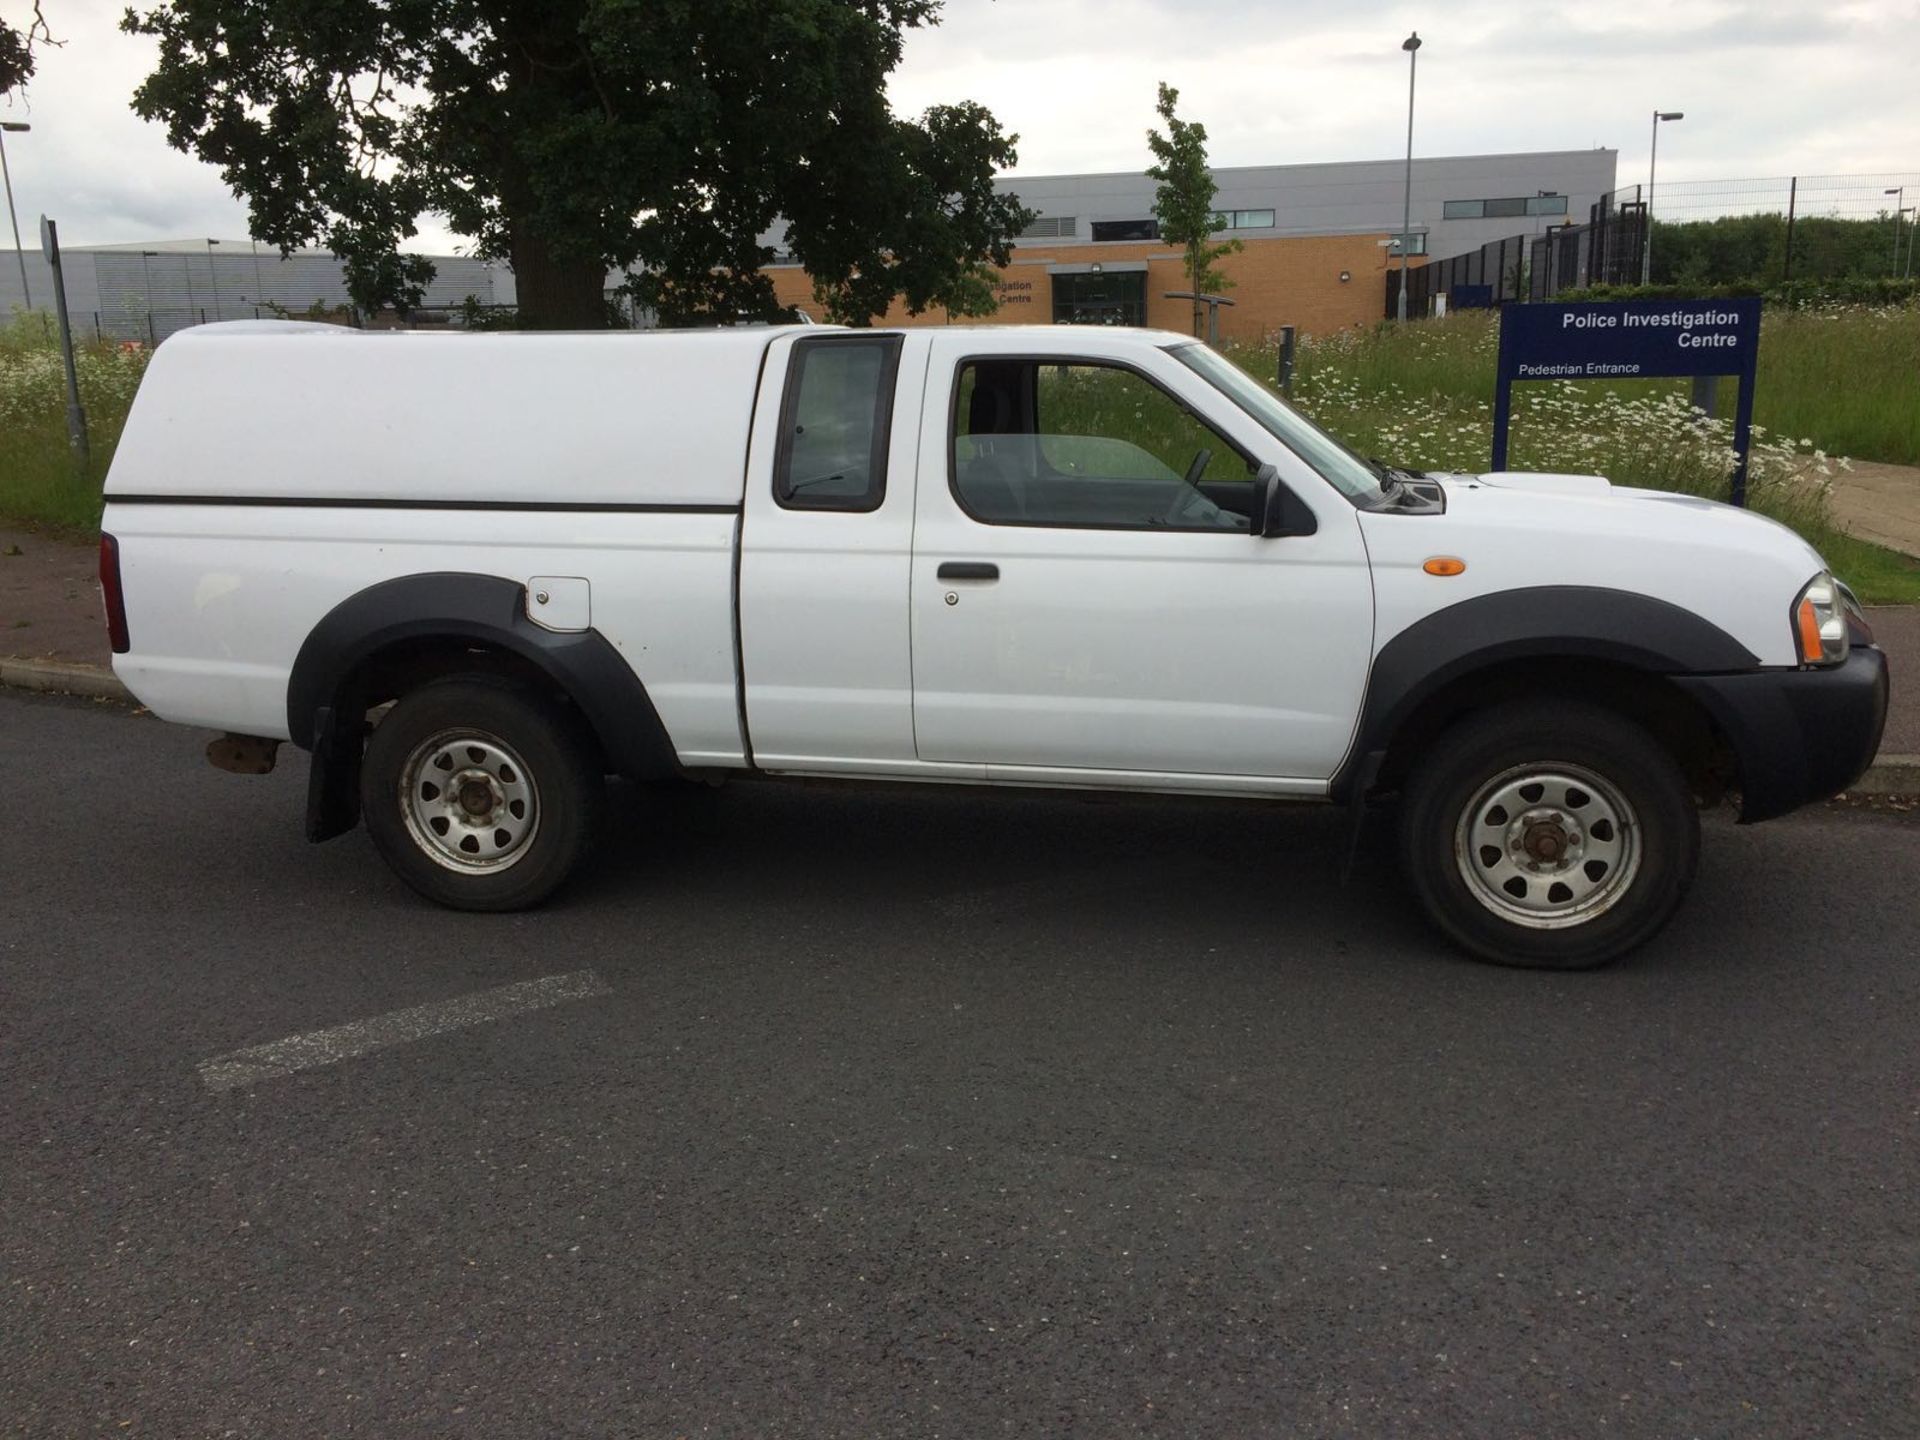 (EX POLICE) 2005 NISSAN D22 2.5 DI 4X4 - Image 6 of 13